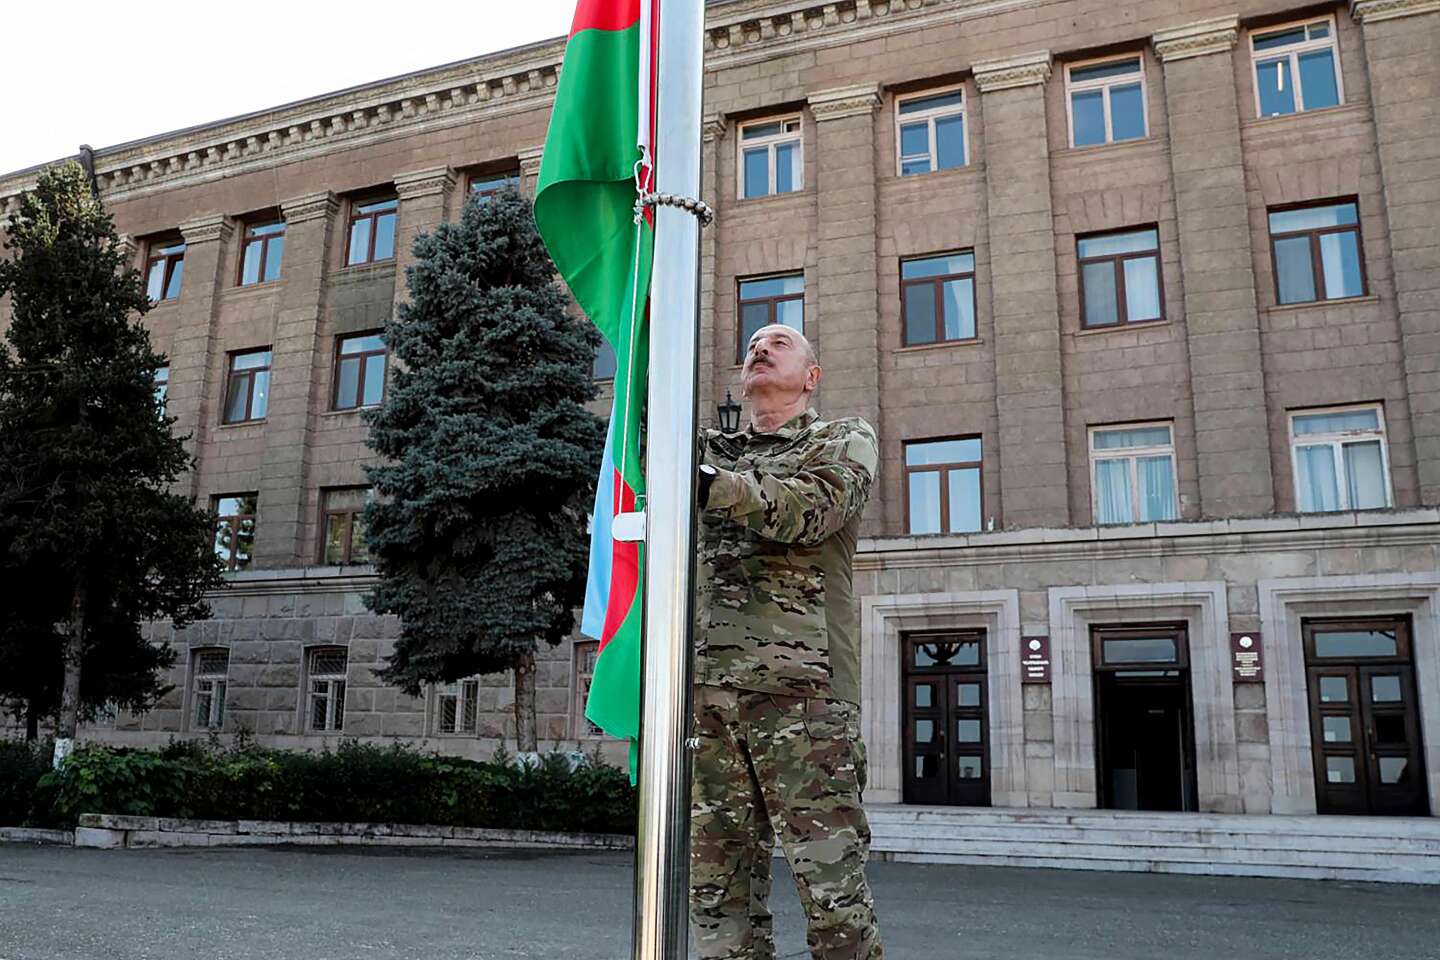 In Nagorno-Karabakh, the President of Azerbaijan raised the national flag in the capital of the region